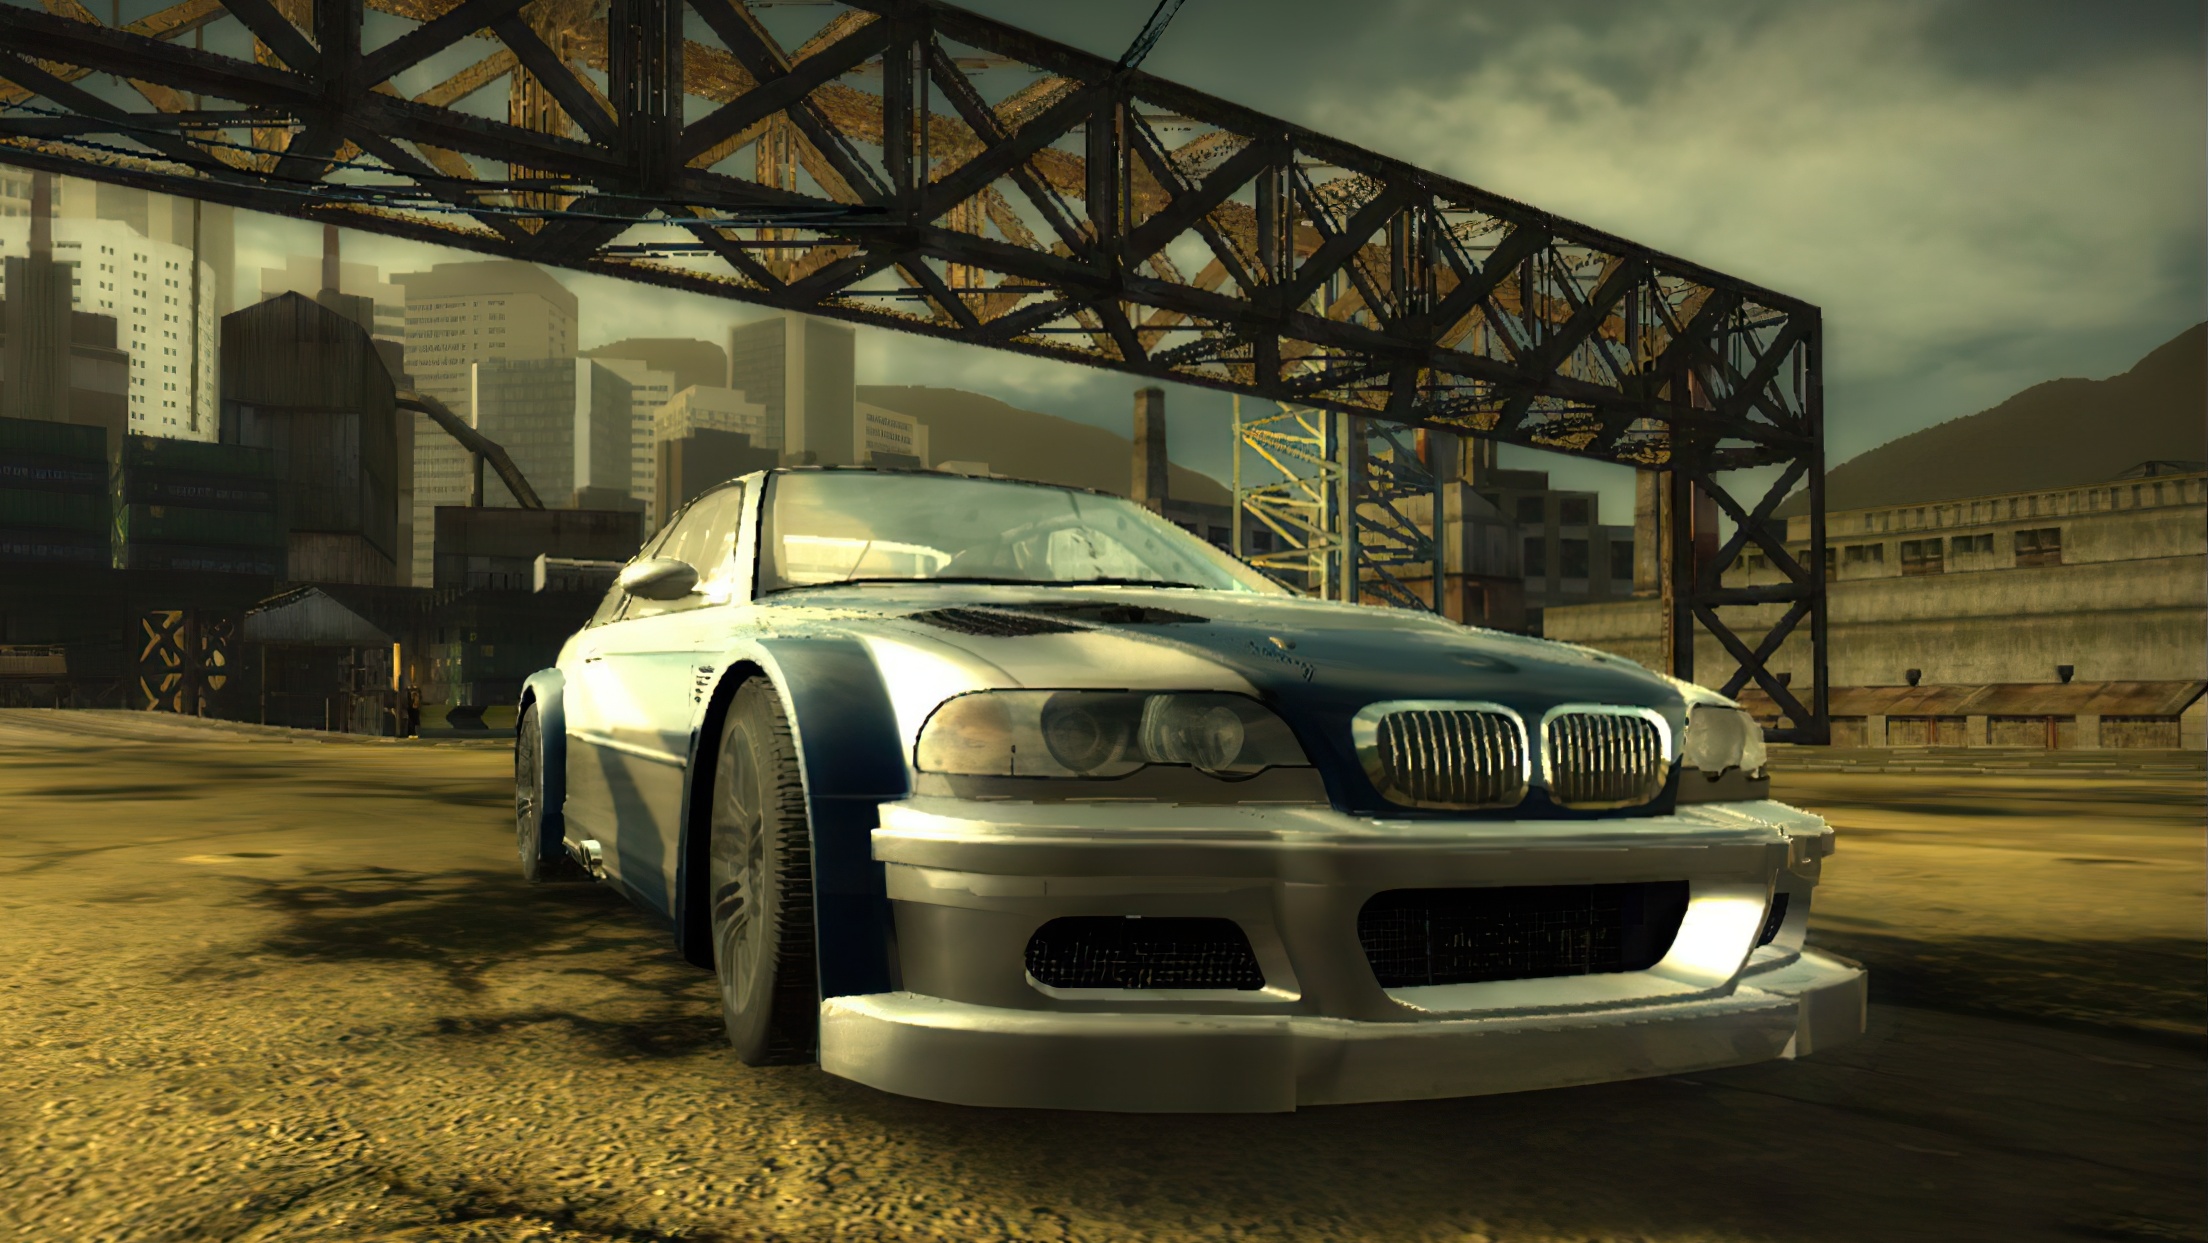 Need for speed most wanted песни. BMW m3 GTR. Need for Speed most wanted 2005. Нид фор СПИД most wanted 2005. Мост вантед 1.